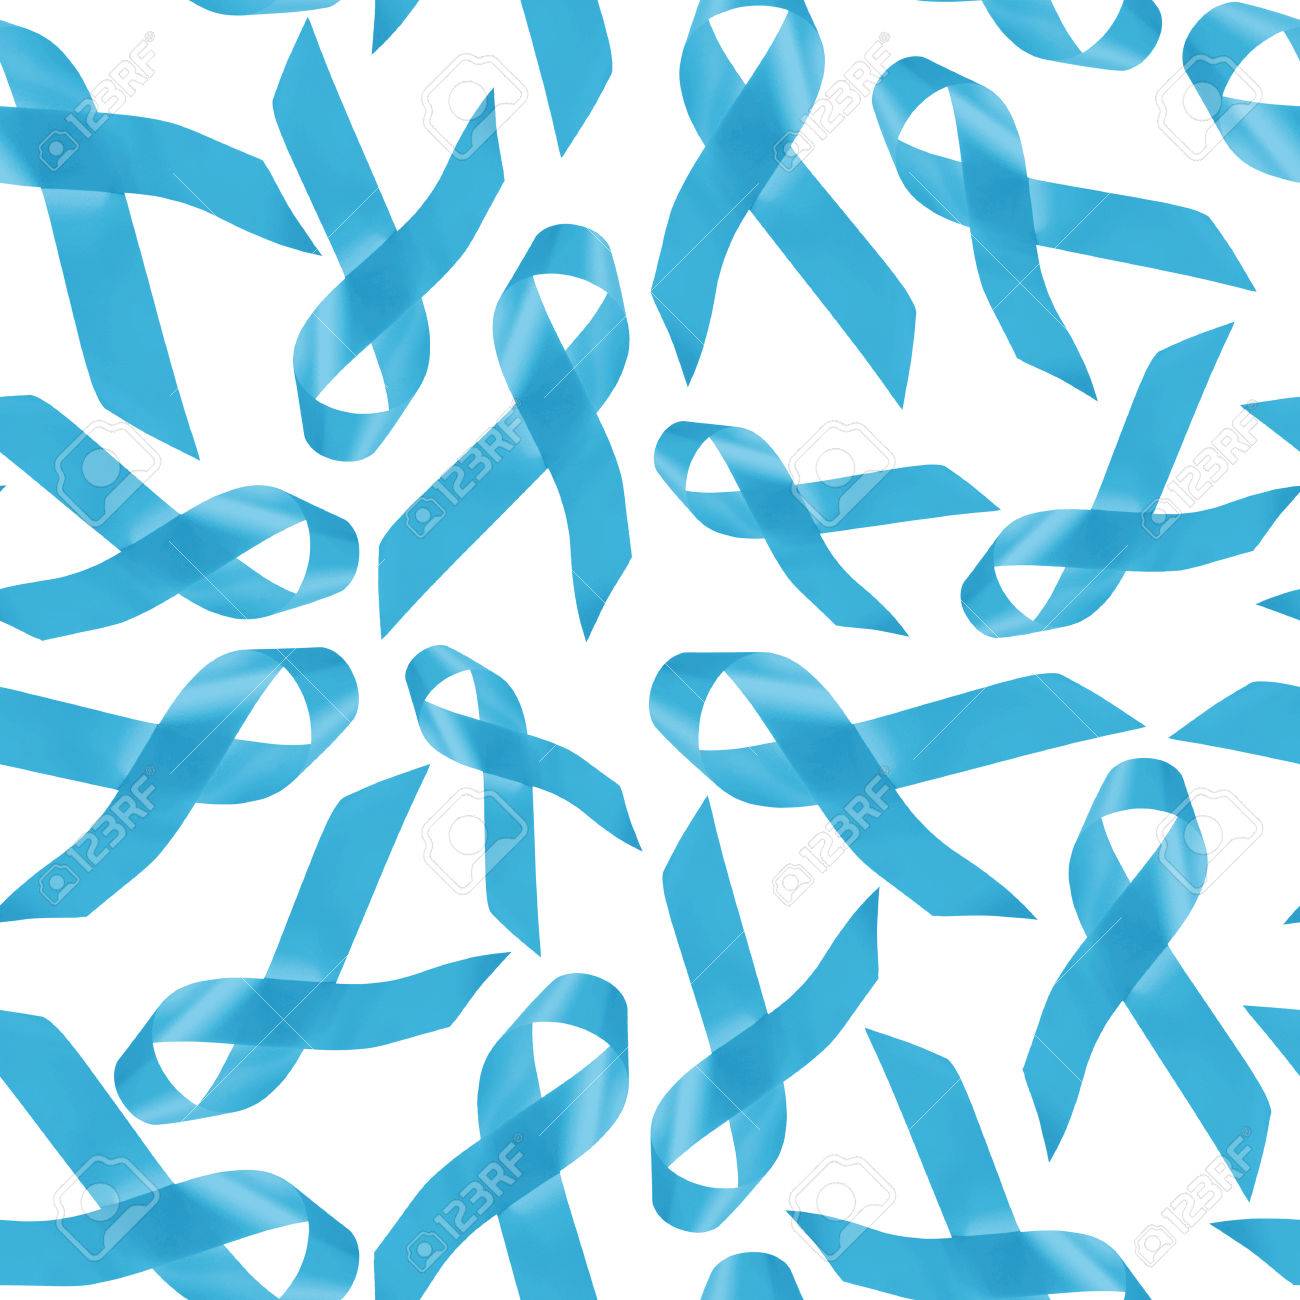 Prostate Cancer Awareness Background Seamless Pattern Made Of